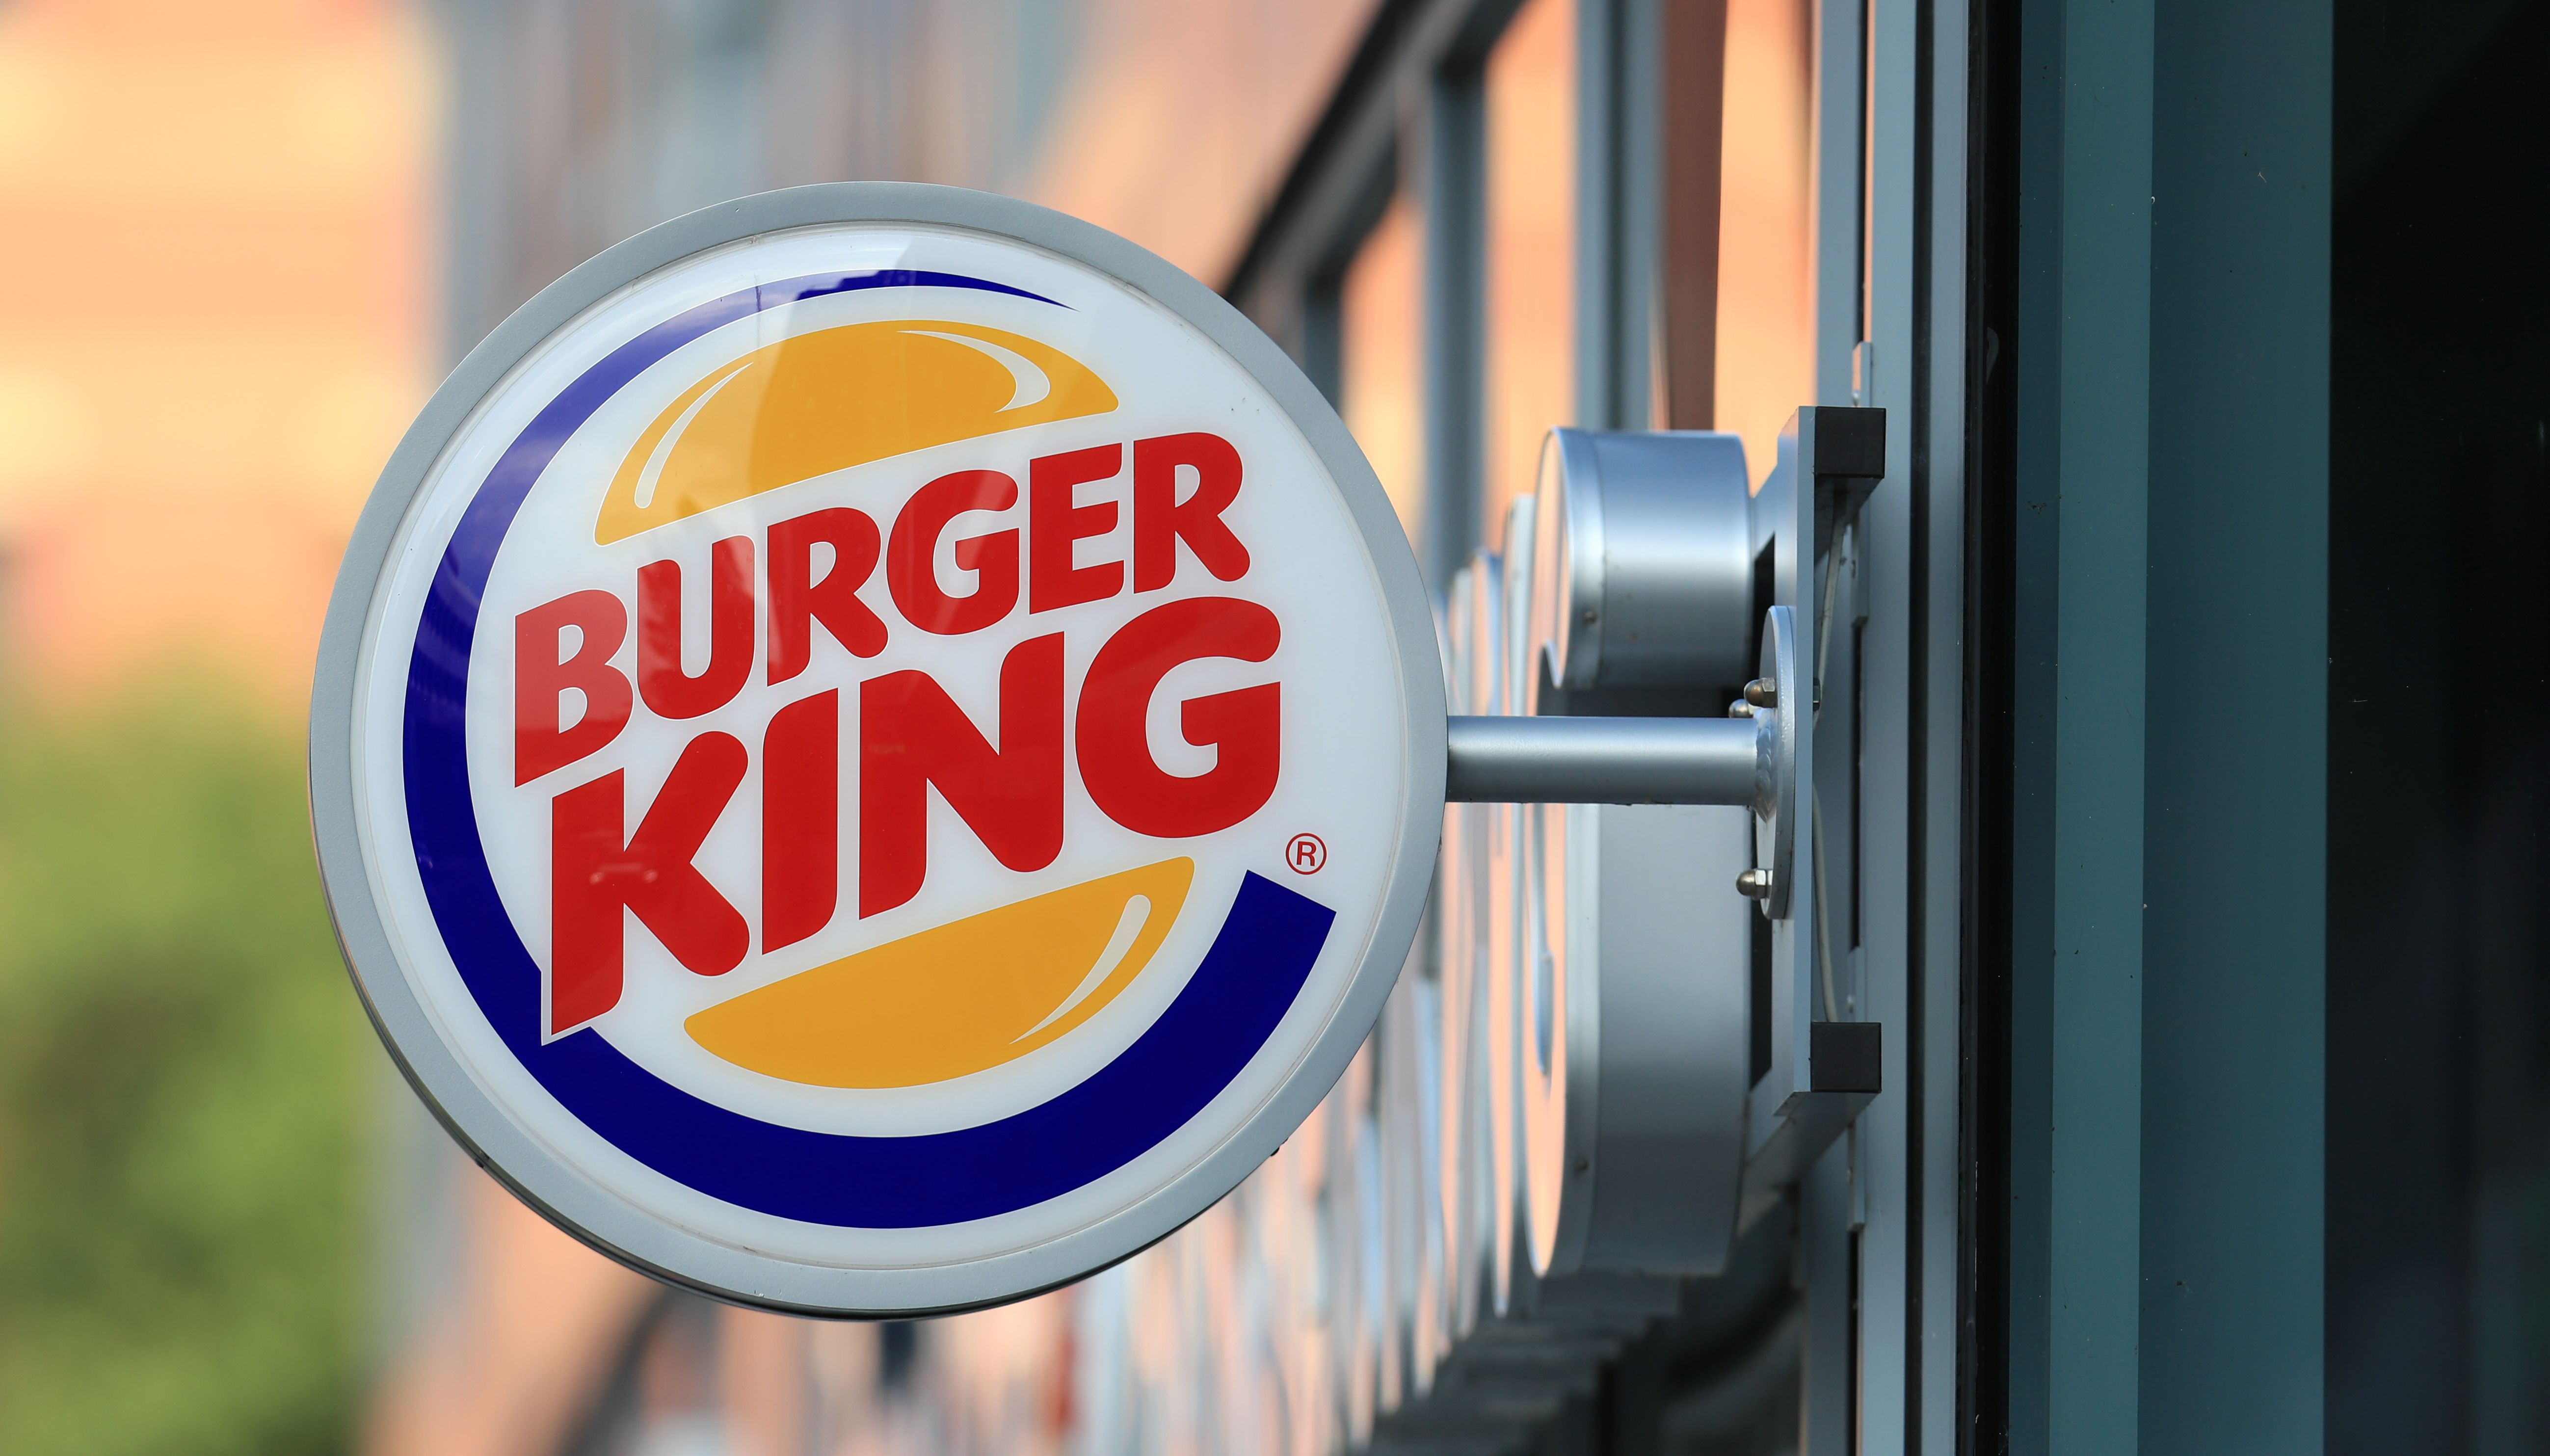 Burger King Giving Away Free Whoppers For One Day Only